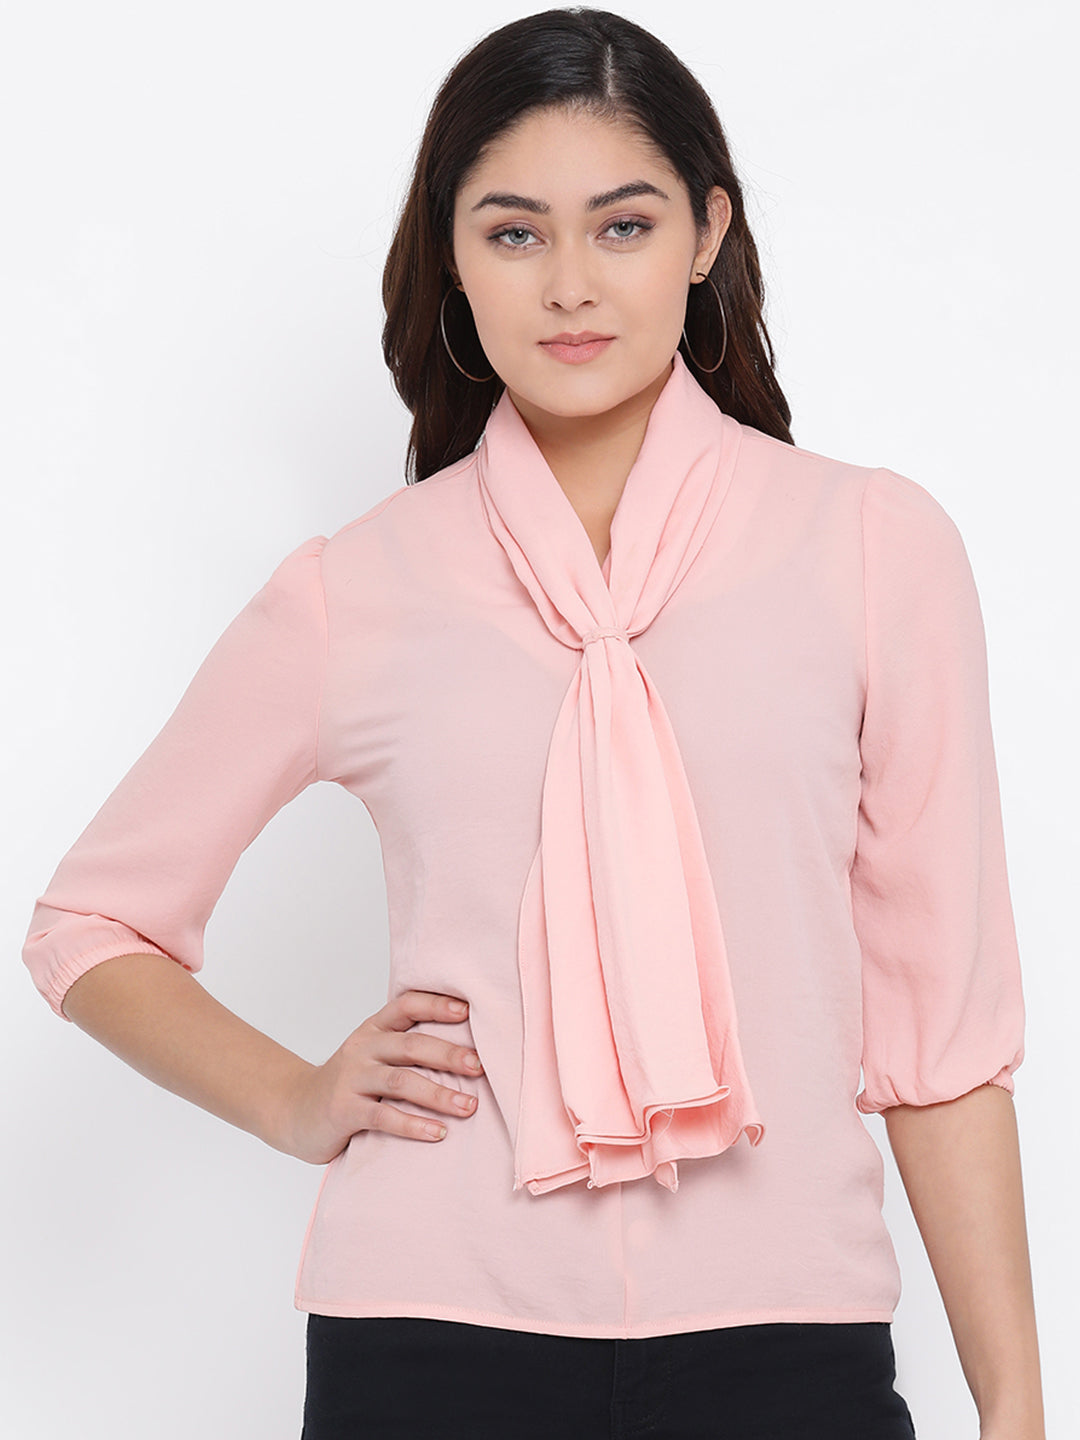 Knotted Collar Casual Top - Women Tops